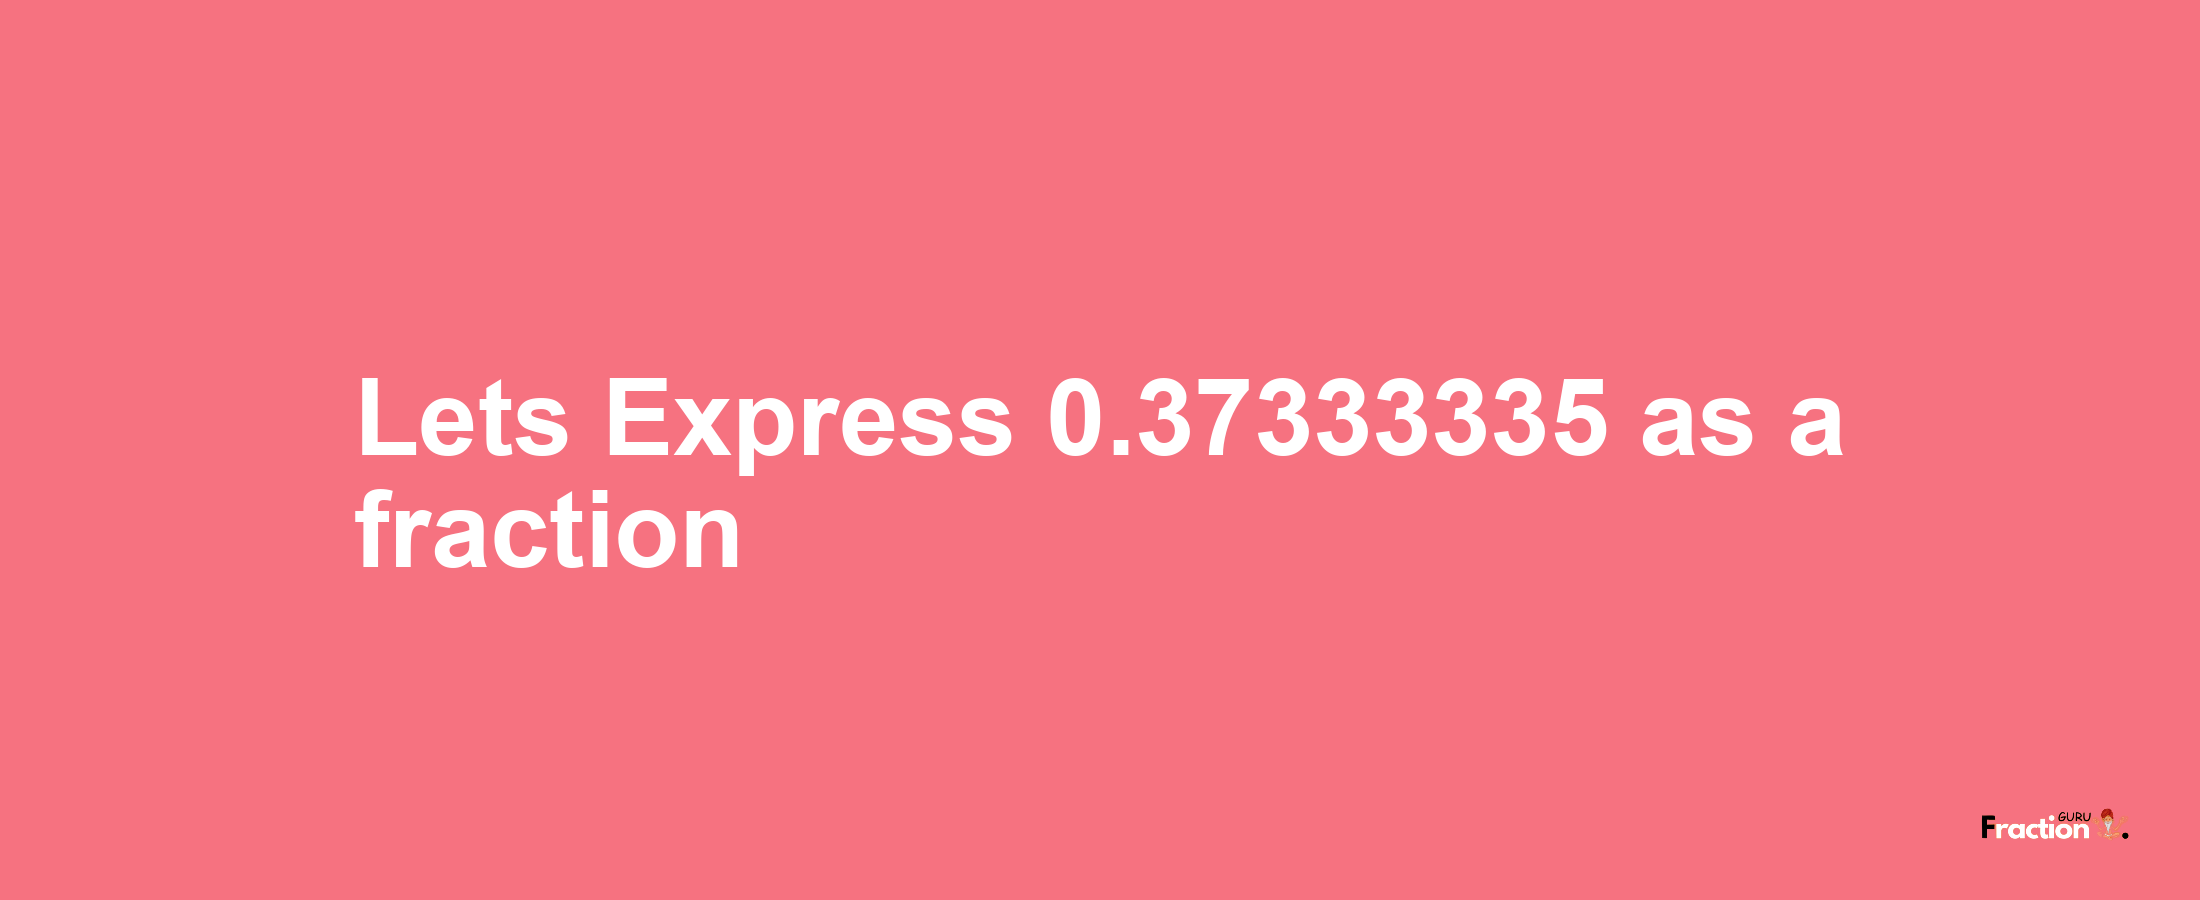 Lets Express 0.37333335 as afraction